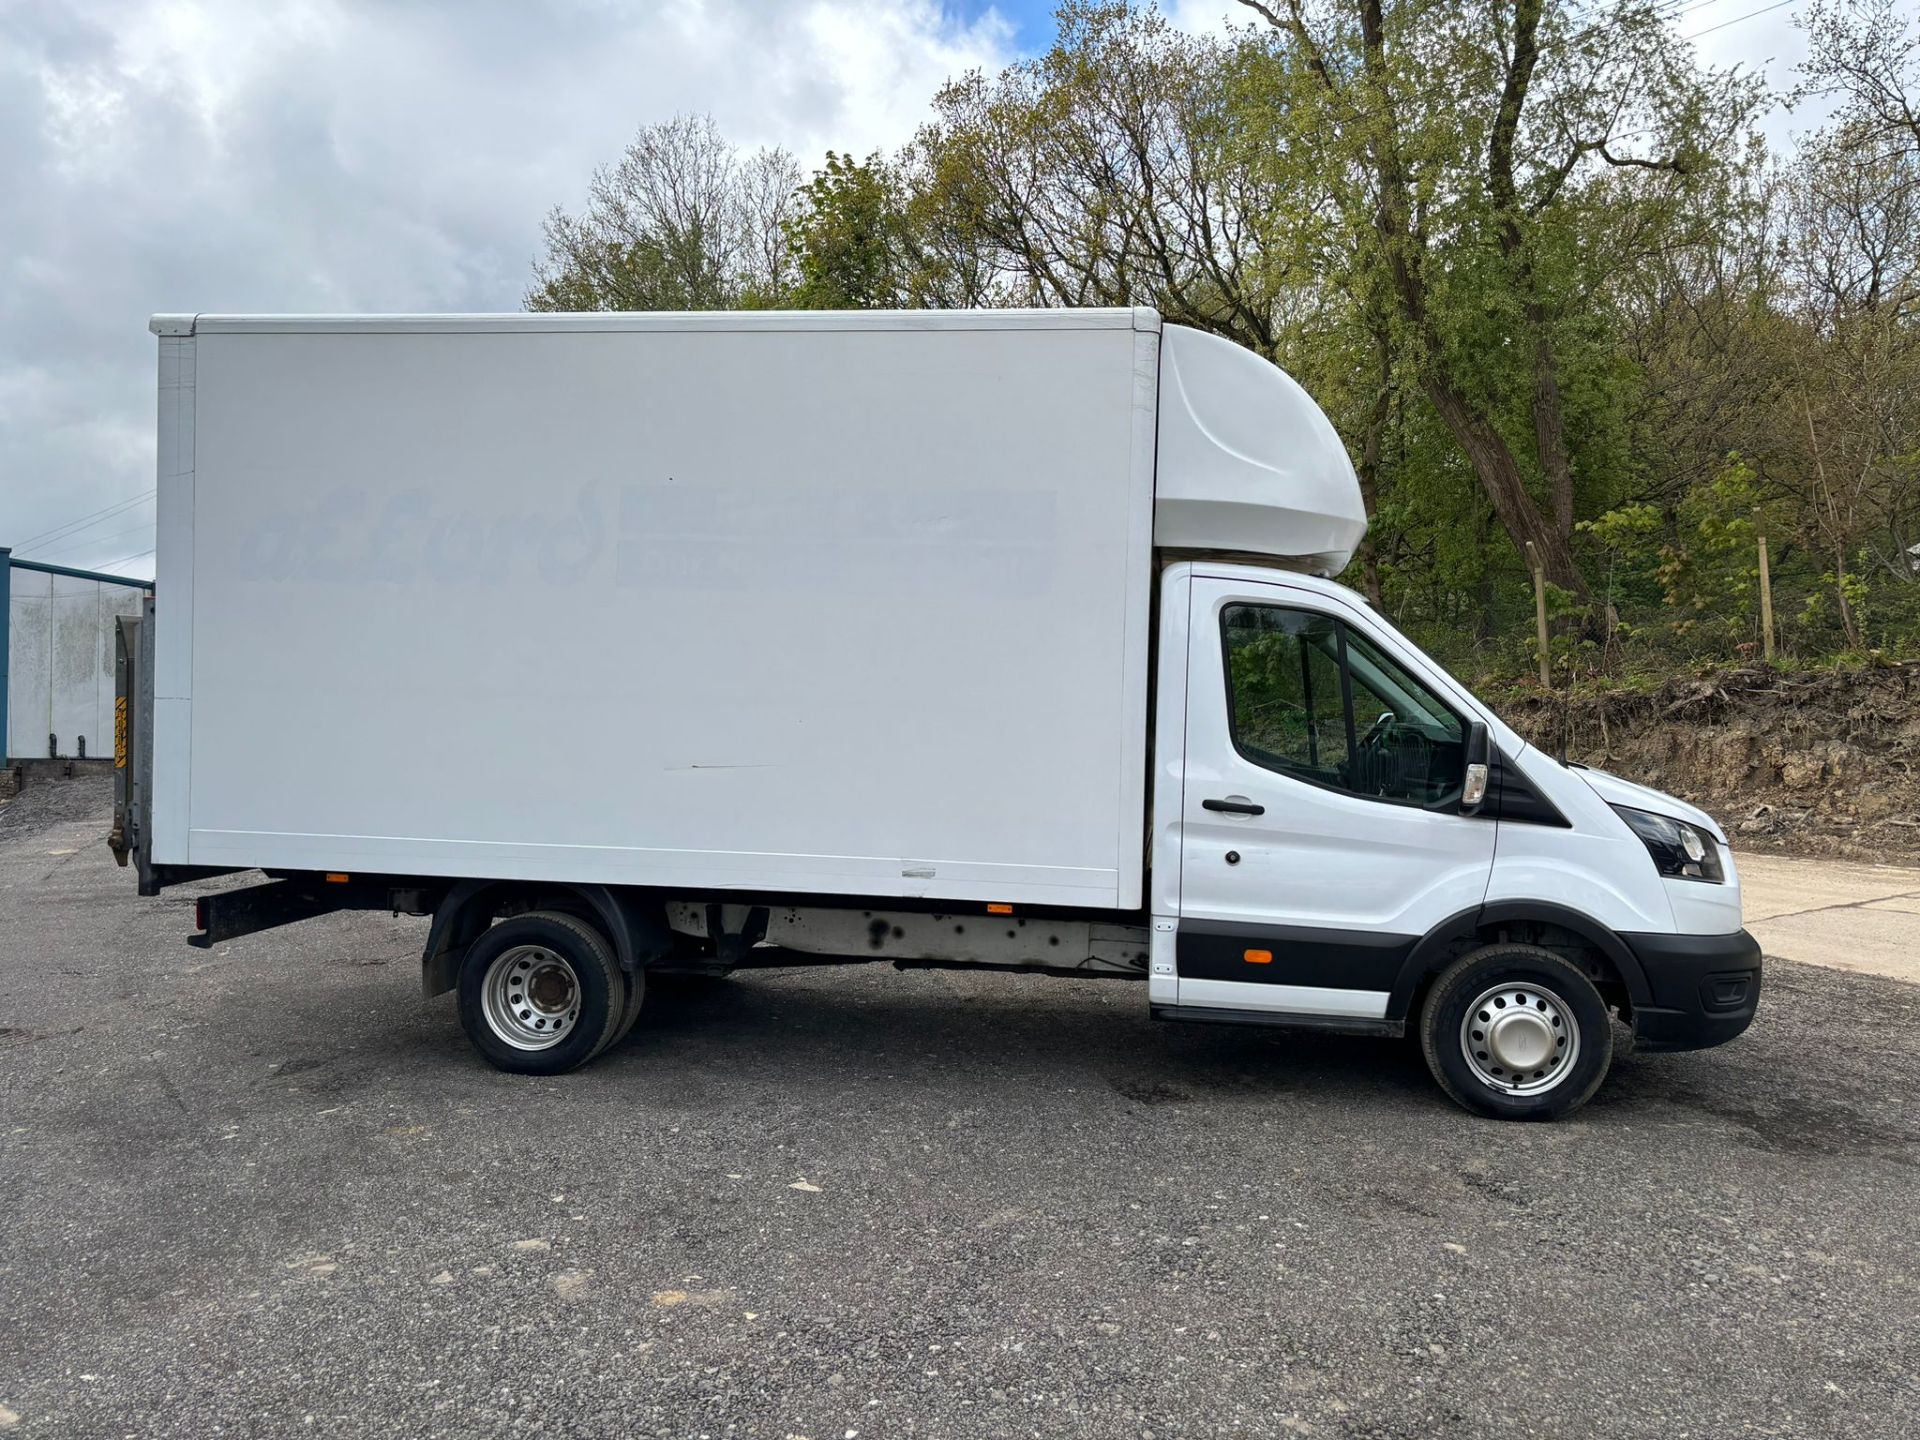 2021 FORD TRANSIT LUTON BOX VAN WITH TAIL LIFT - SPACIOUS AND RELIABLE! - Image 2 of 11